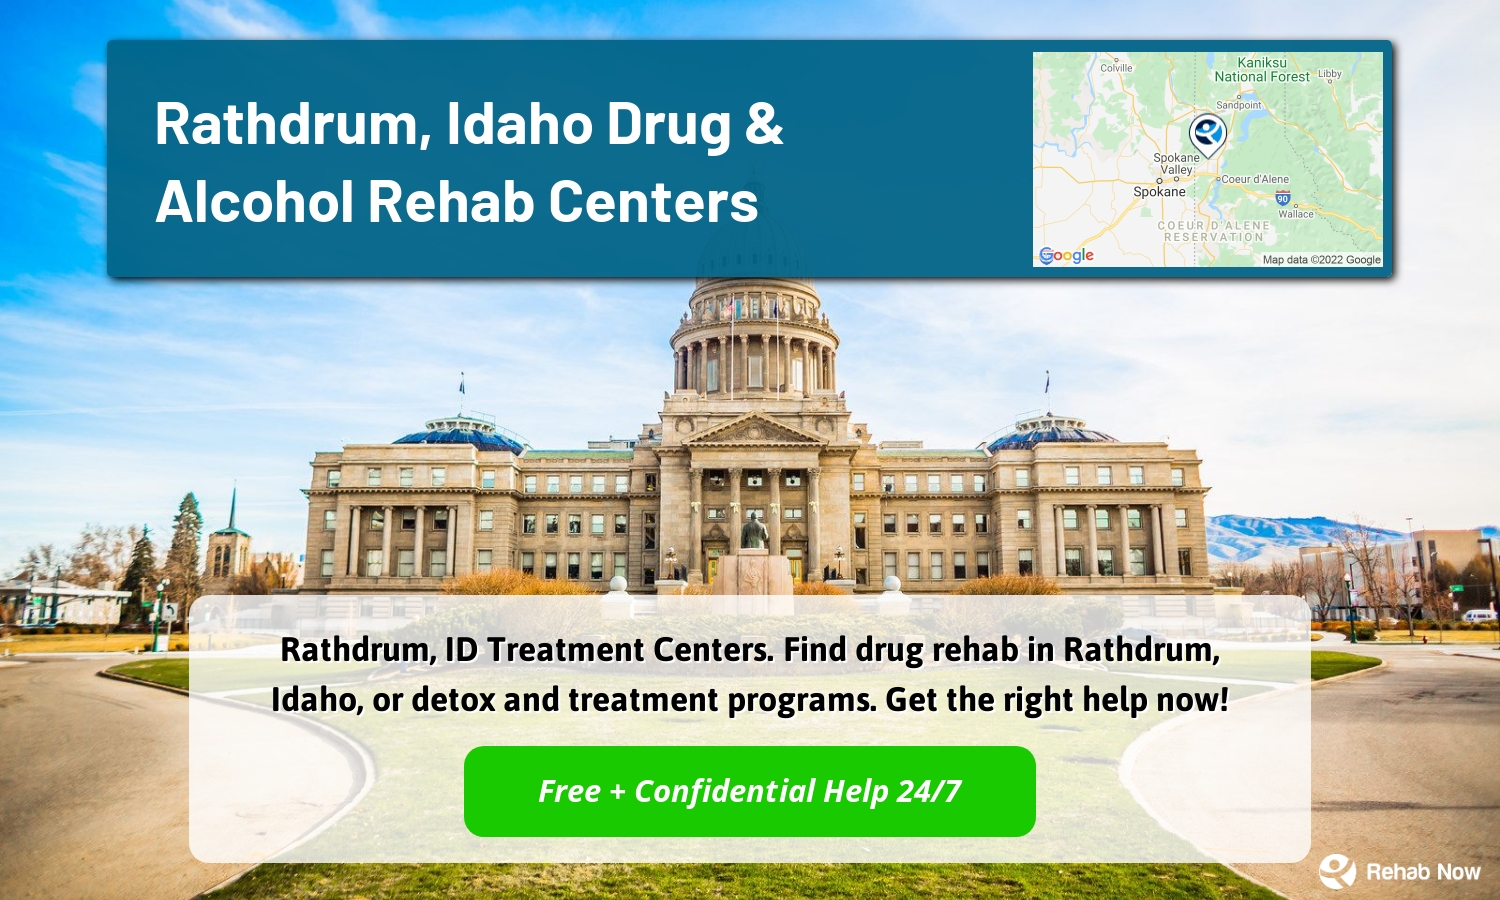 Rathdrum, ID Treatment Centers. Find drug rehab in Rathdrum, Idaho, or detox and treatment programs. Get the right help now!